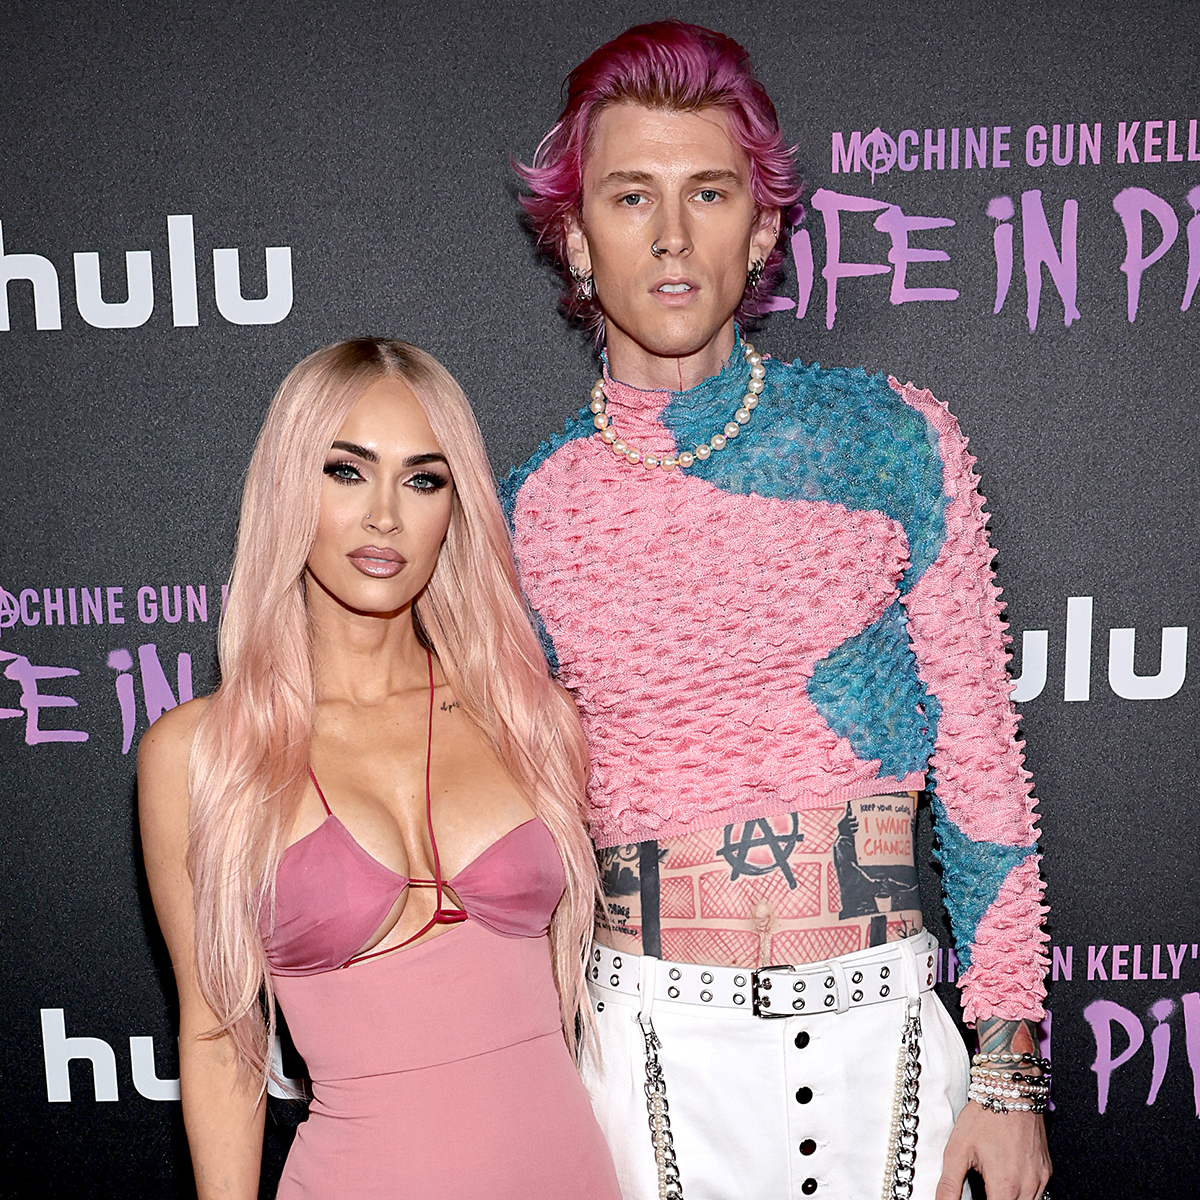 Why Megan Fox Asked Machine Gun Kelly If He Was Breastfed as a Baby